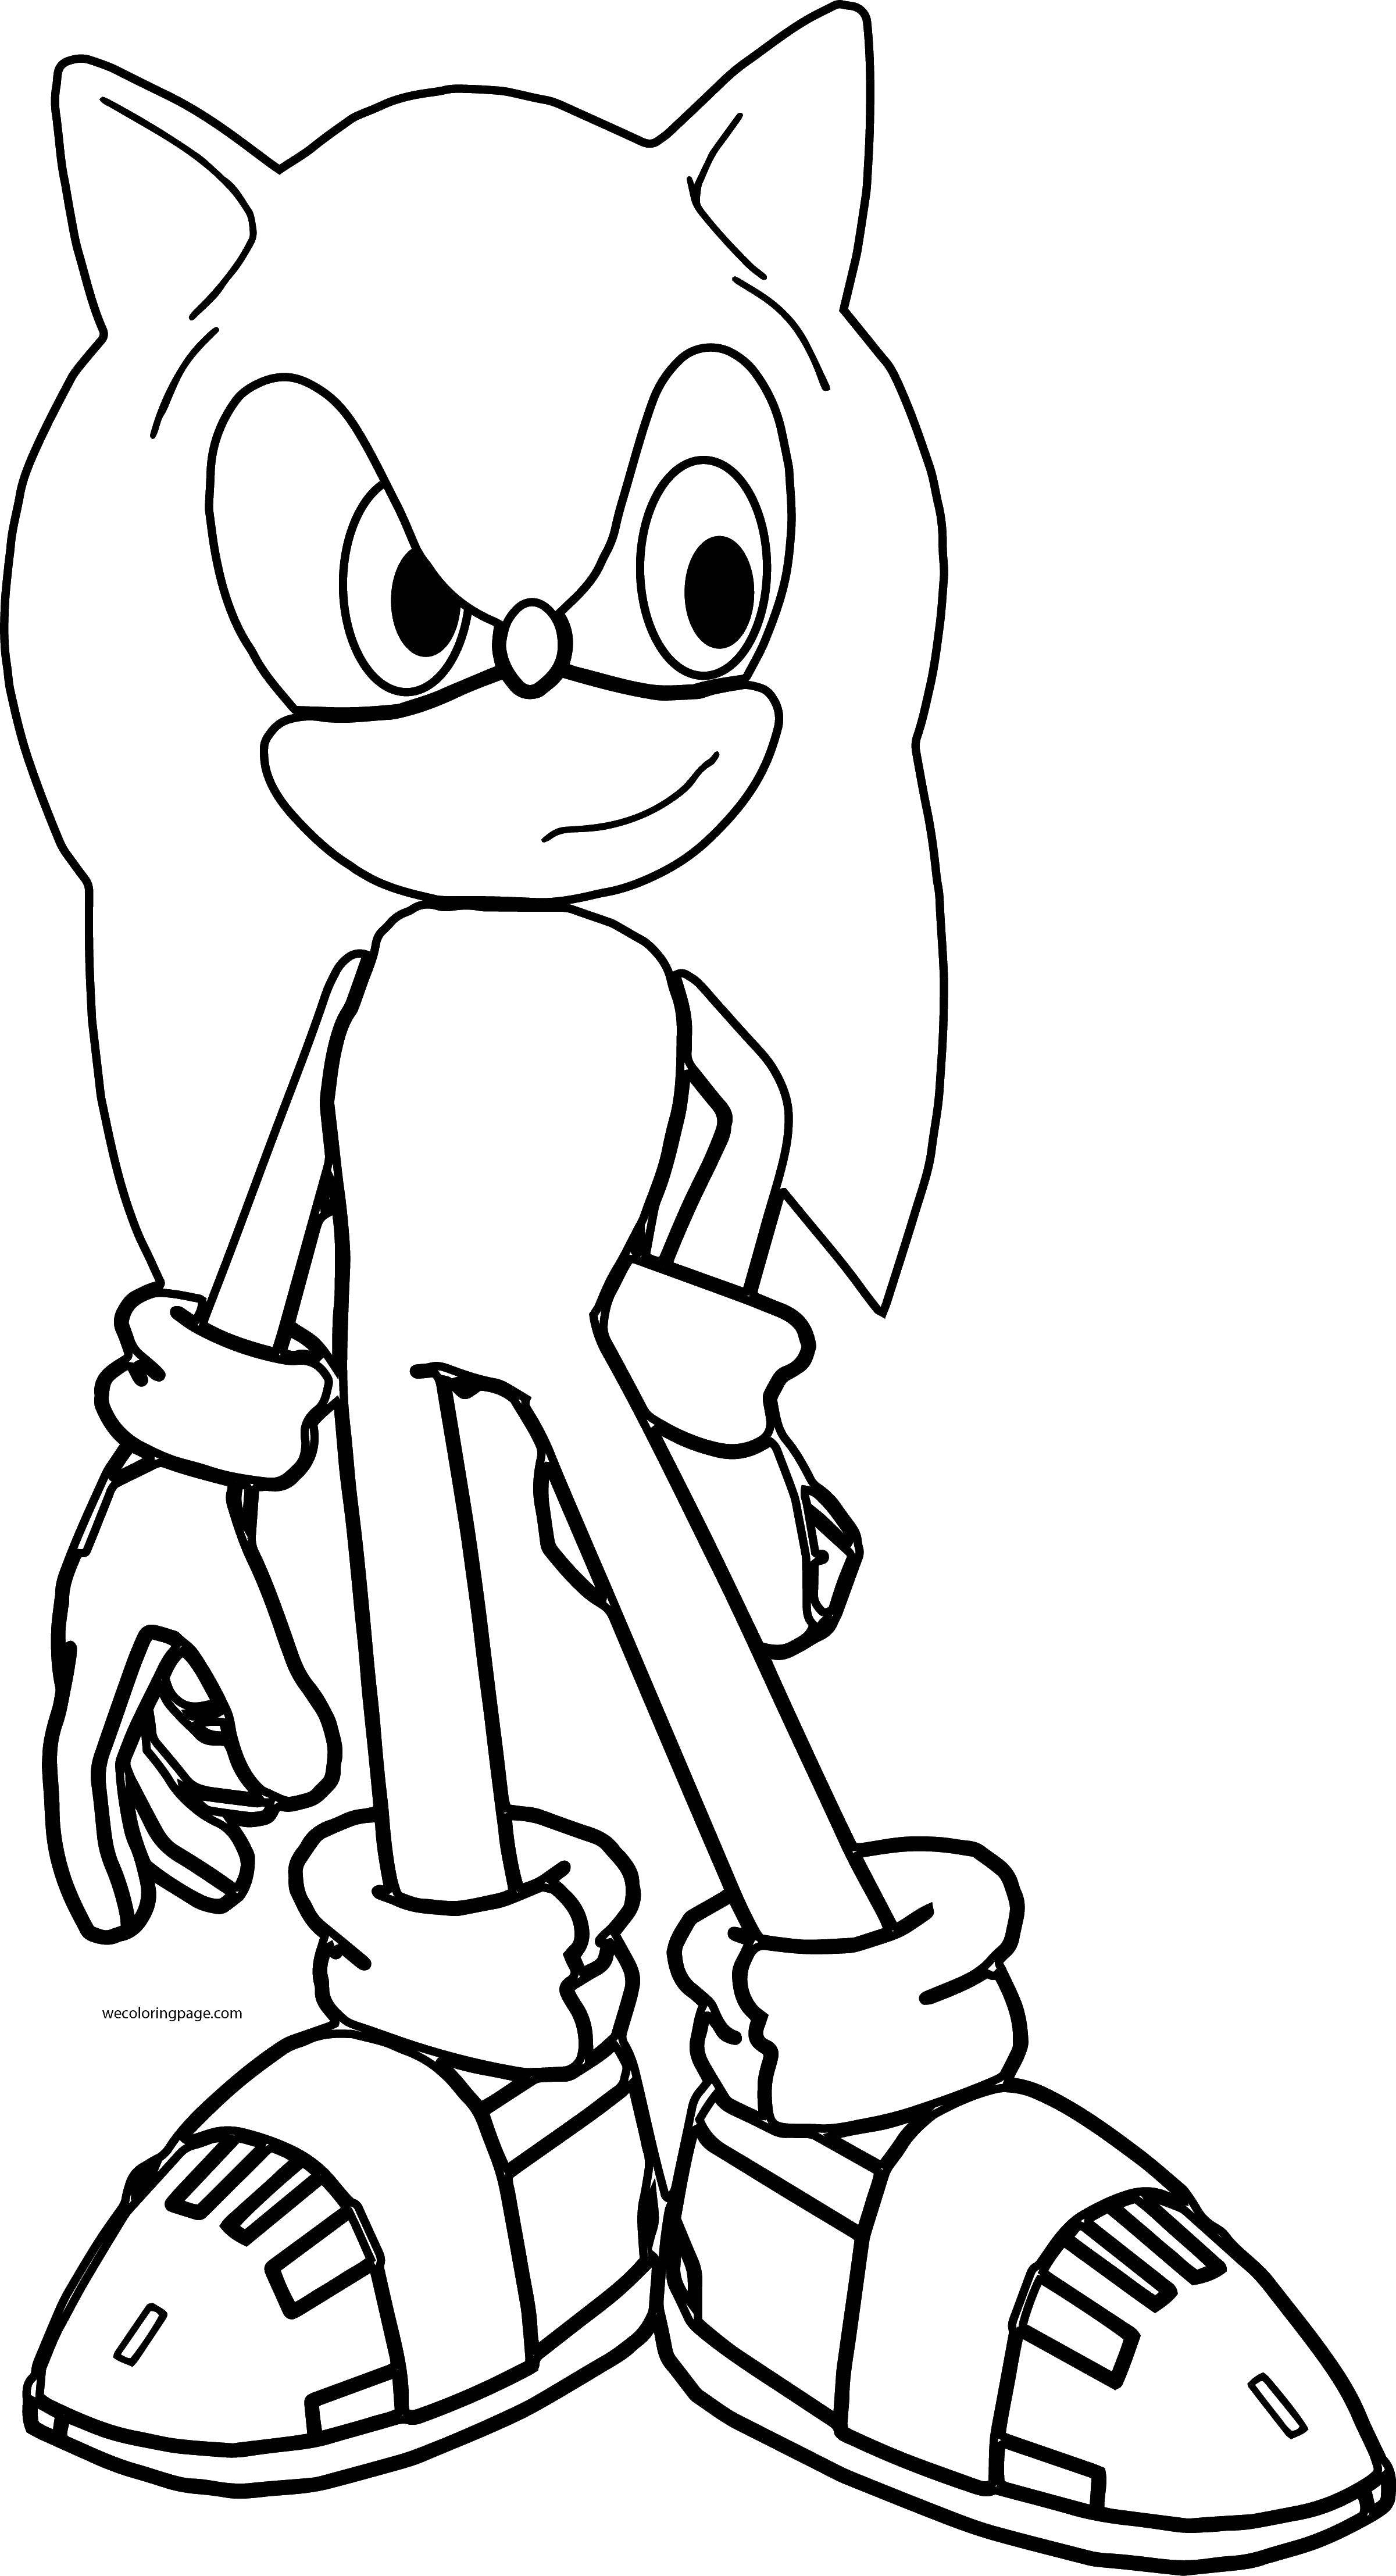 Coloring Sonic the hedgehog. Category The character from the game. Tags:  sonic , hedgehog, games.